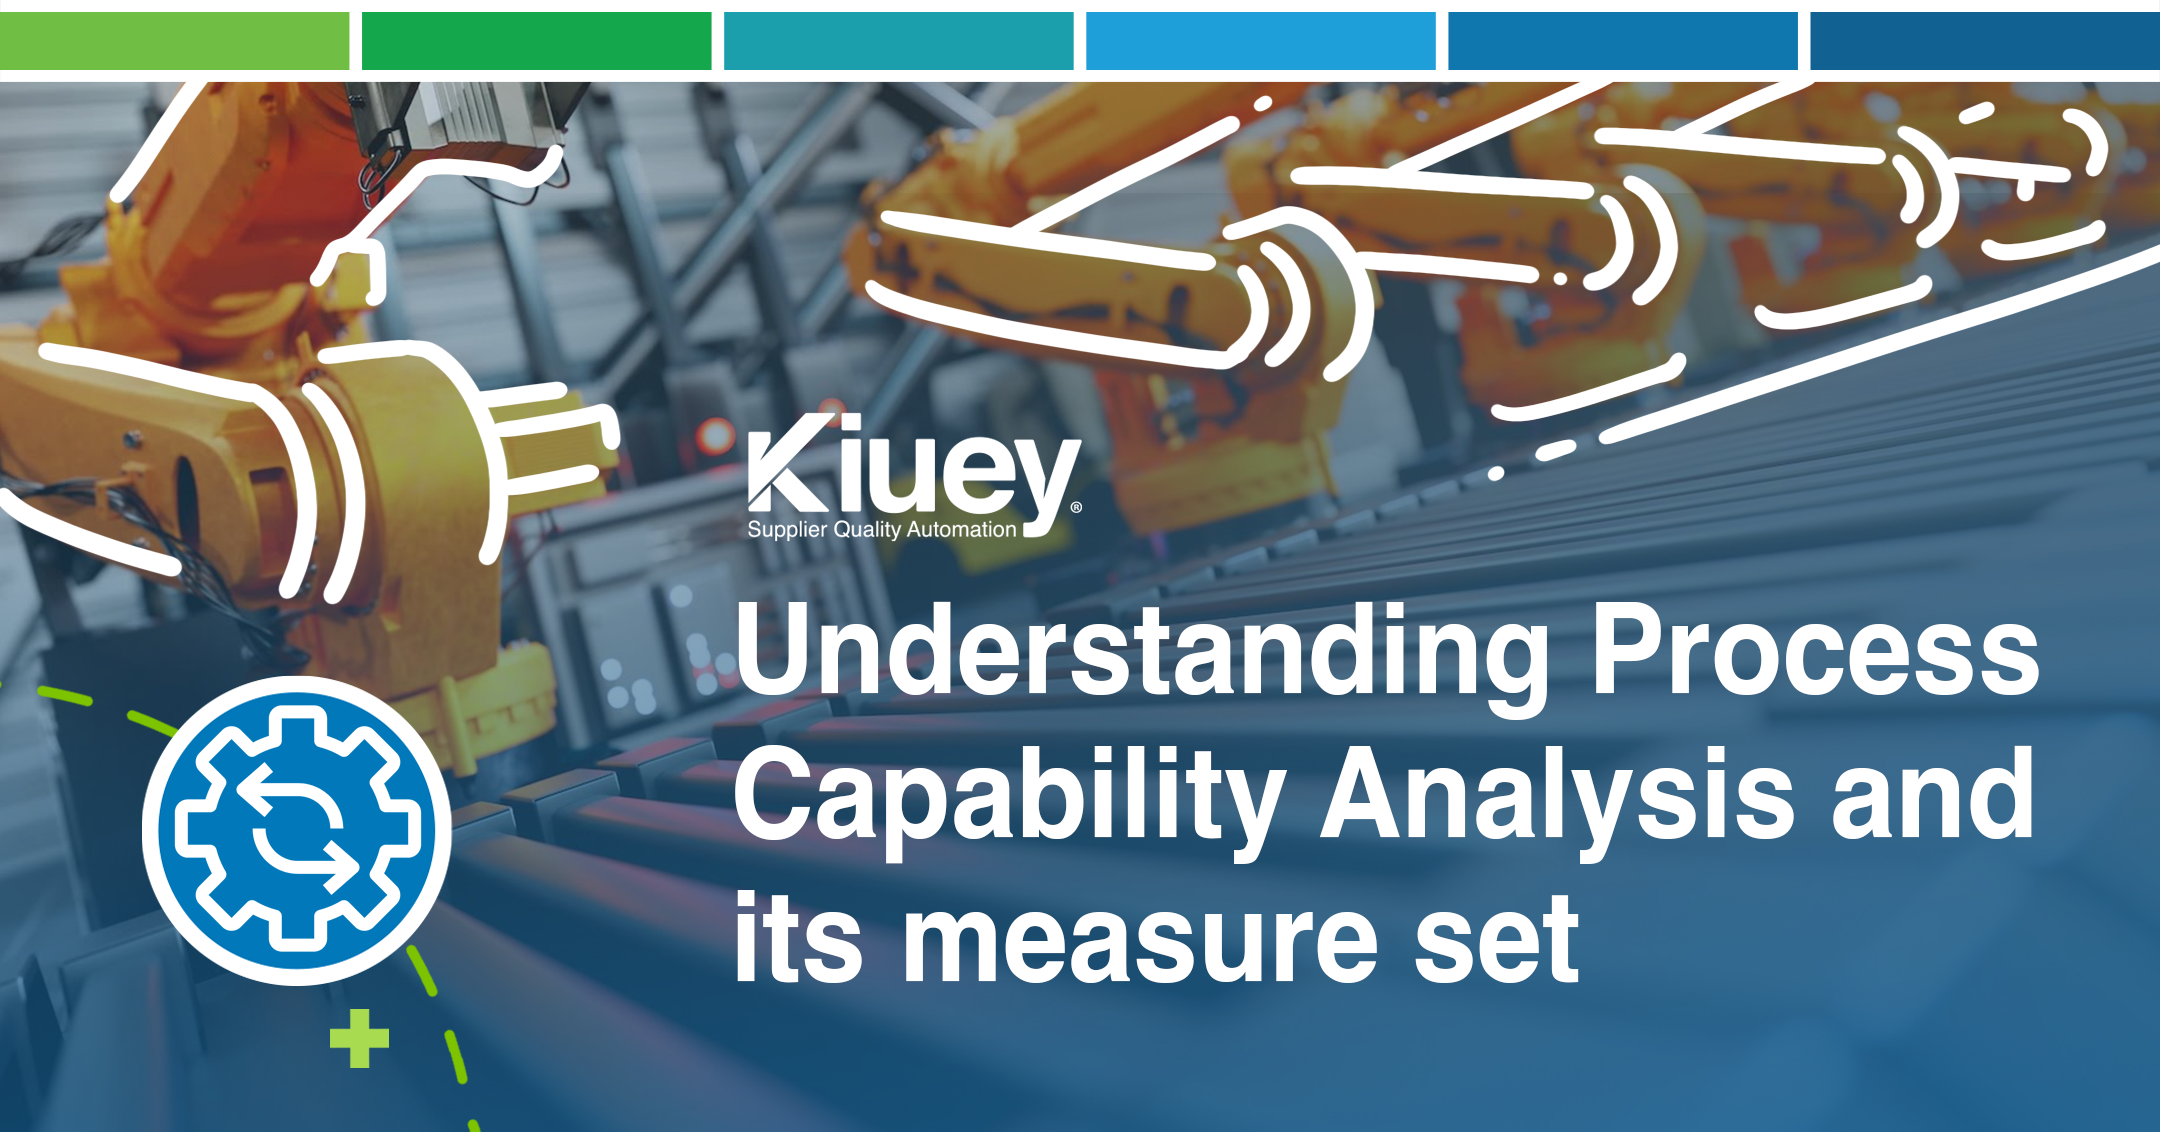 Understanding Process Capability Analysis and its measure set (Cp, Cpk, Pp and Ppk)